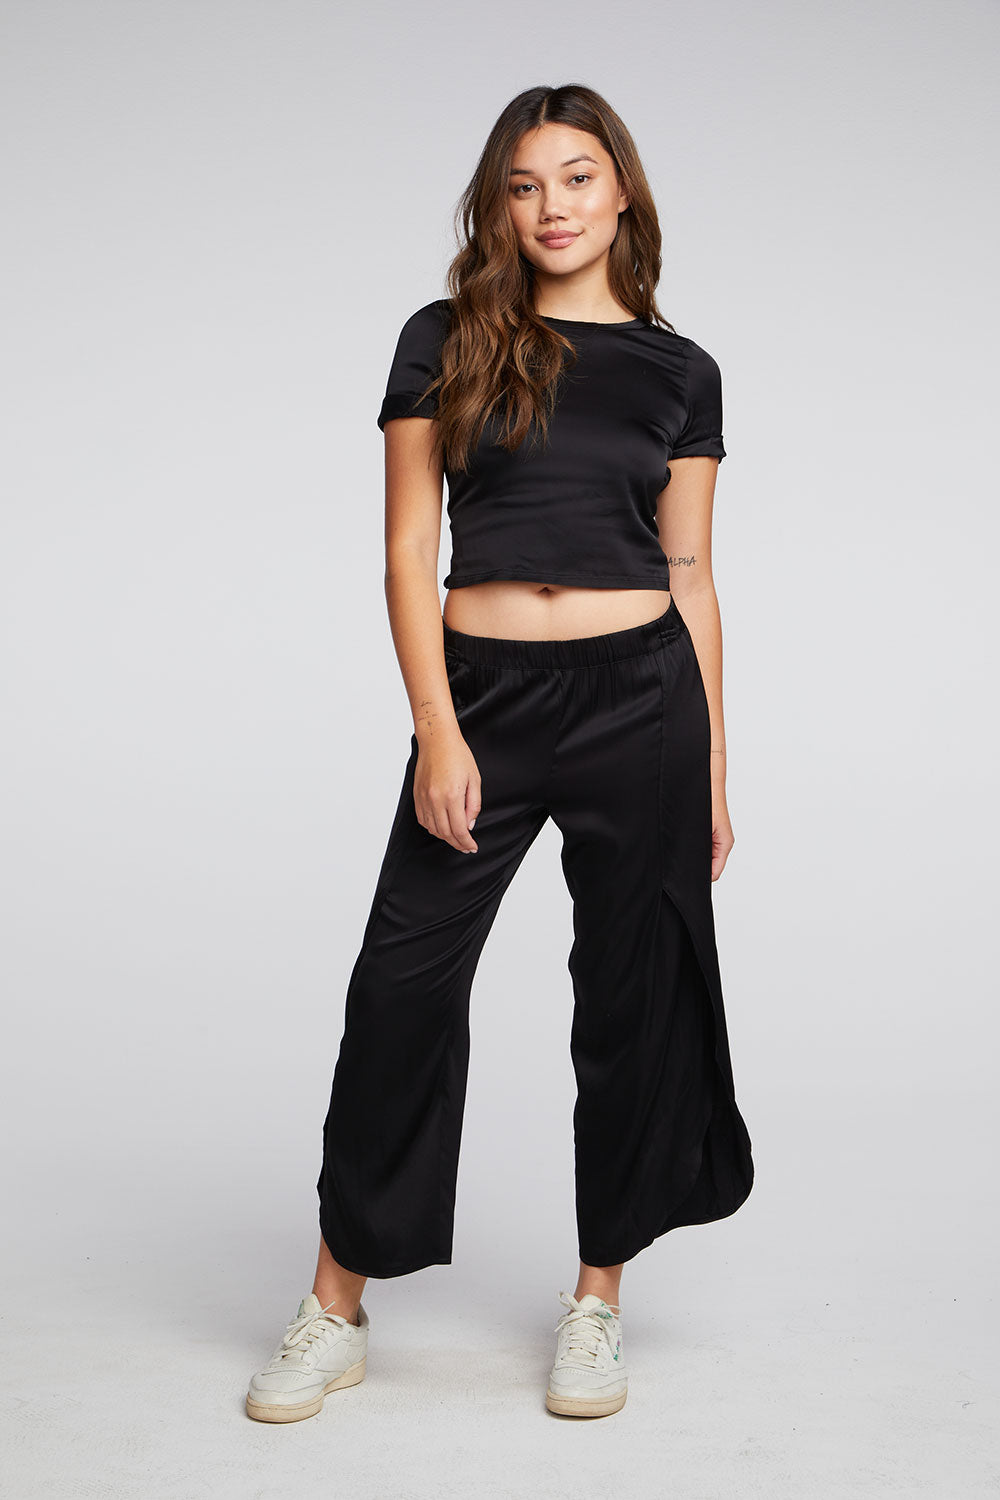 Stretch Silky Basics Cropped Open Back Tie Tee WOMENS chaserbrand